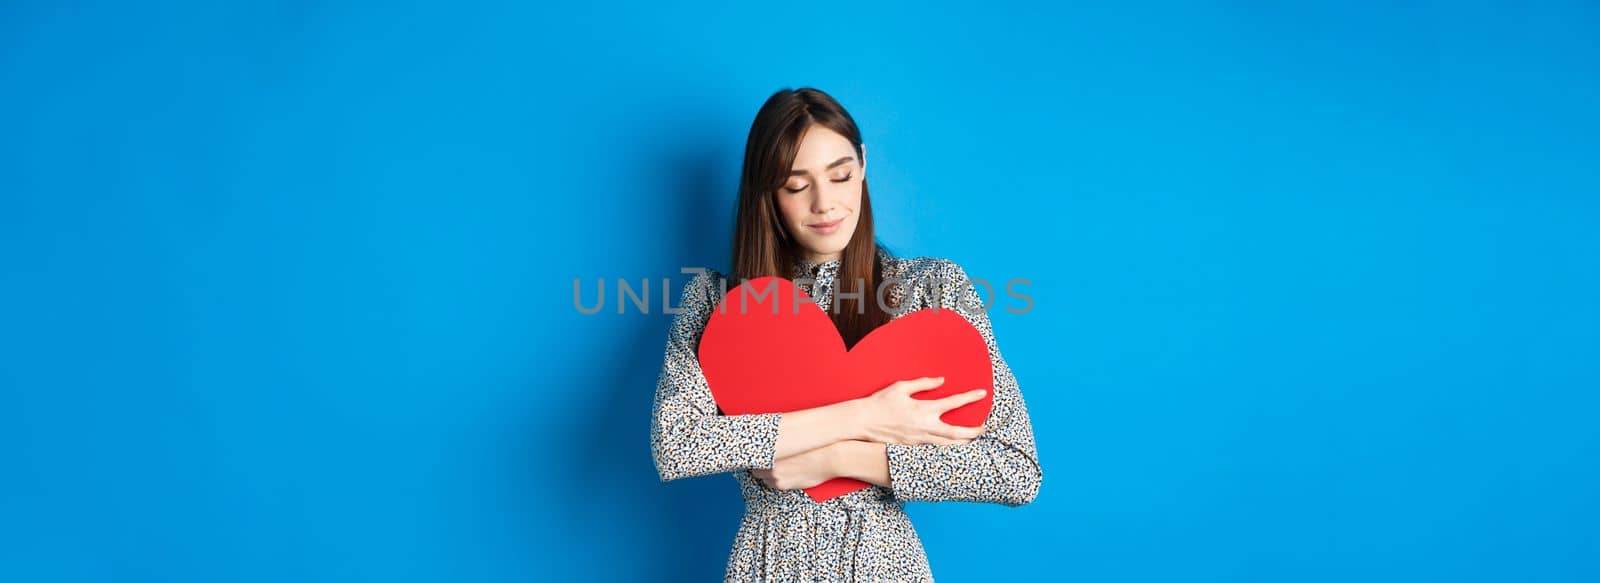 Valentines day. Romantinc girl in dress hugging big red heart cutout, close eyes and smile with dreamy face, imaging sensual date, standing on blue background.